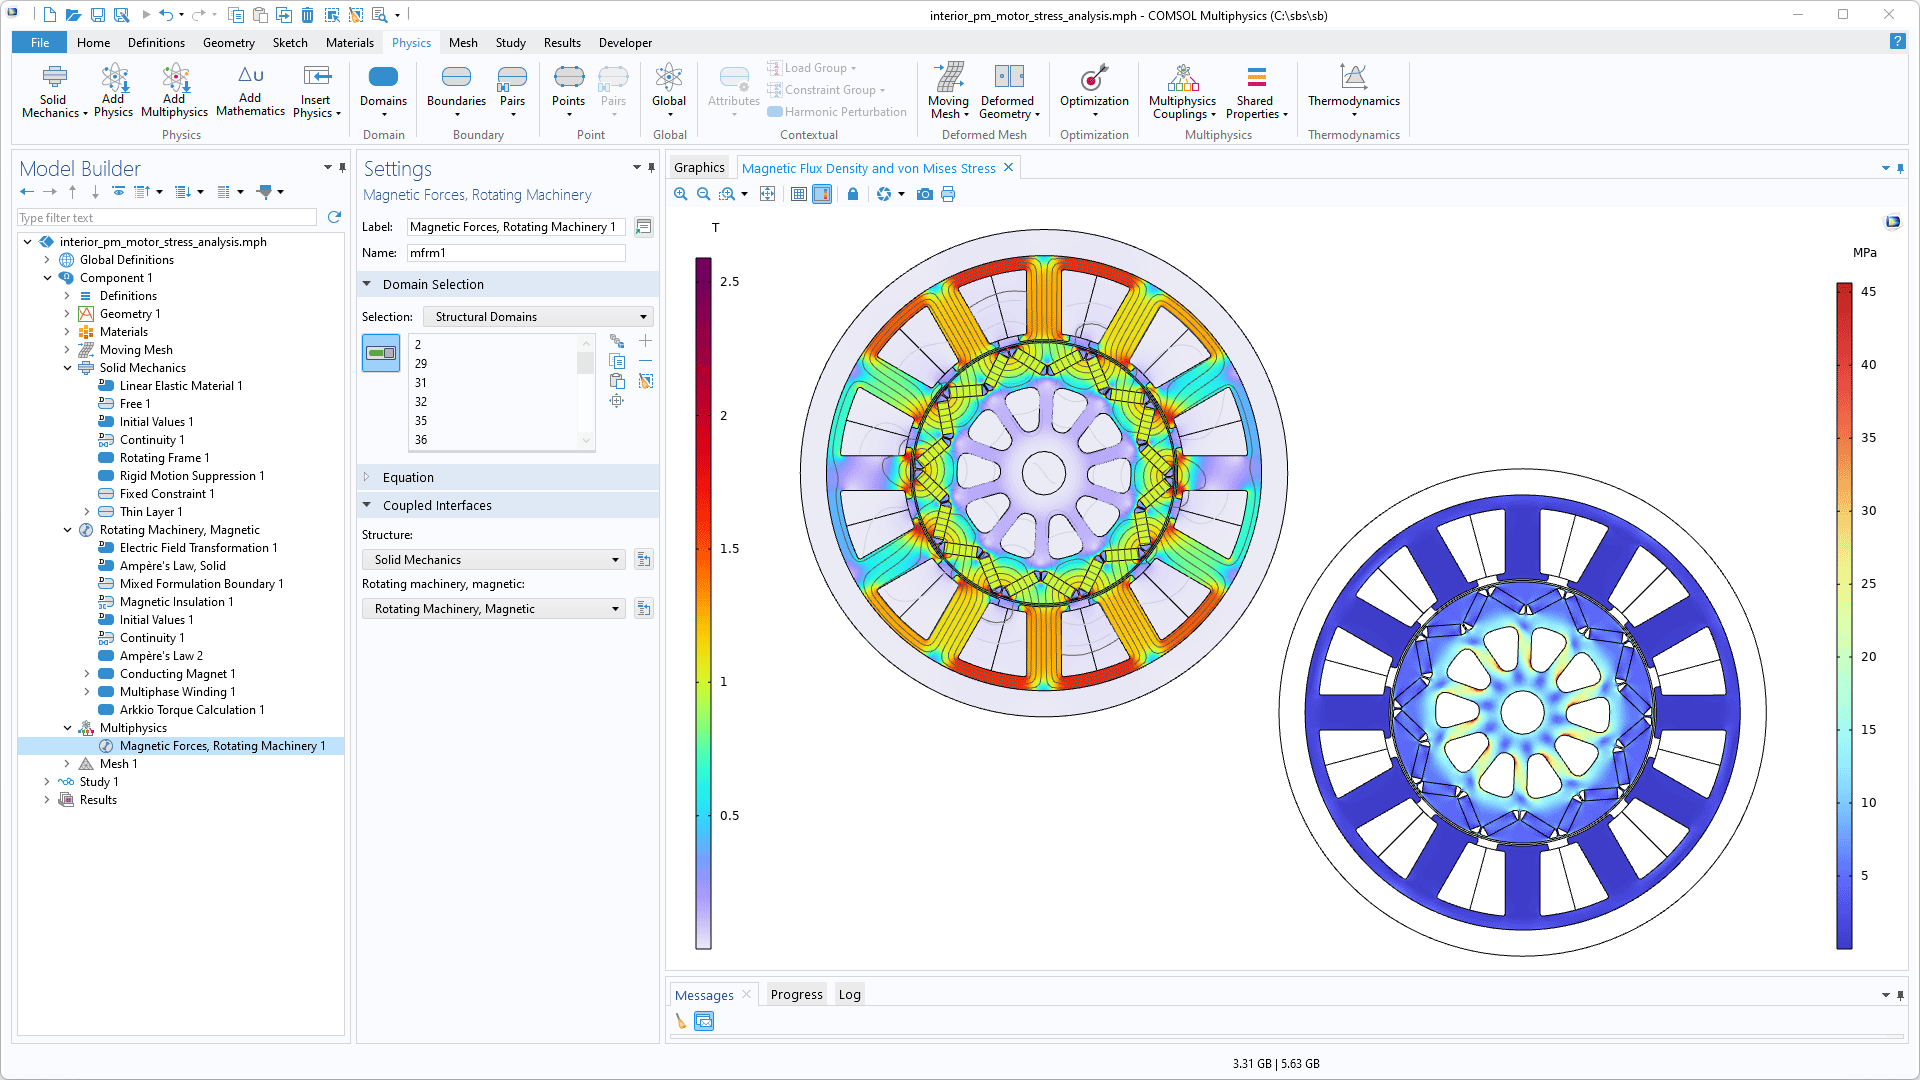 The COMSOL Multiphysics UI showing the Model Builder with the Magnetic Forces, Rotating Machinery node highlighted; the corresponding Settings window; and the two results plots of a motor model.